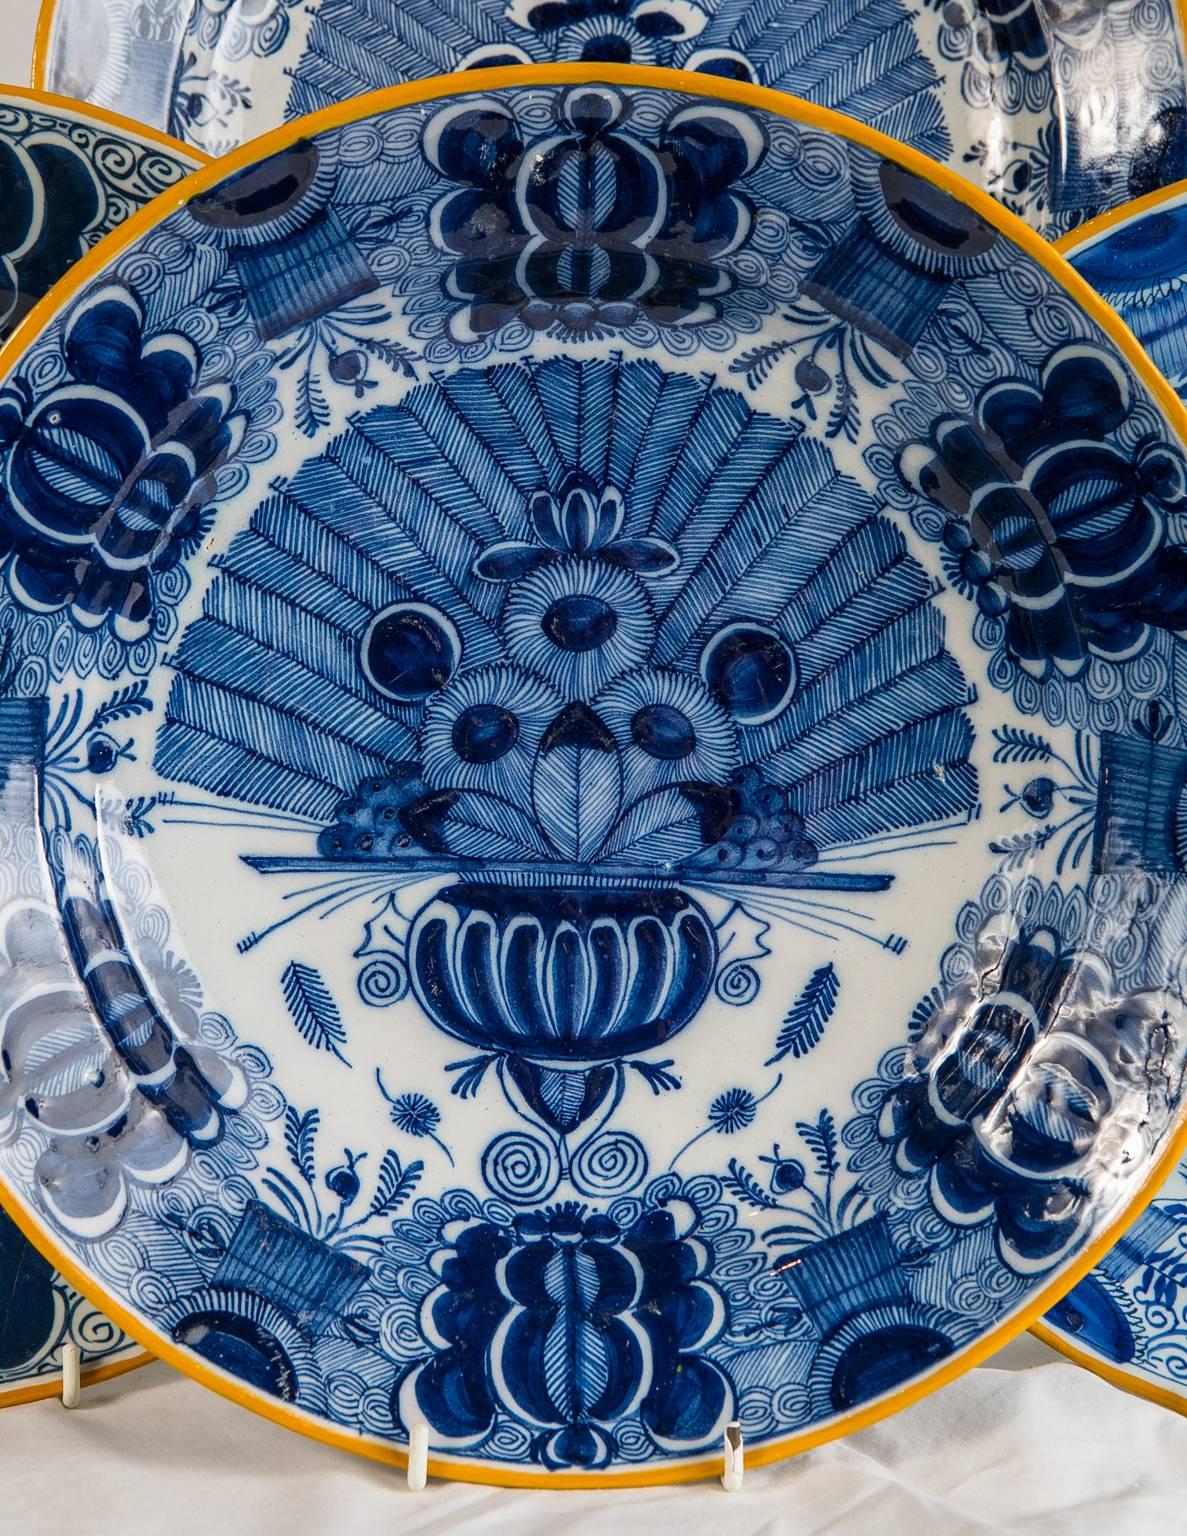 WHY WE LOVE IT: What a table setting!
We are pleased to offer a dozen large Dutch Delft Blue and White chargers hand-painted in deep cobalt blue. The rim of each charger is painted with yellow slip.
The exquisite hand-painted design shows a vase